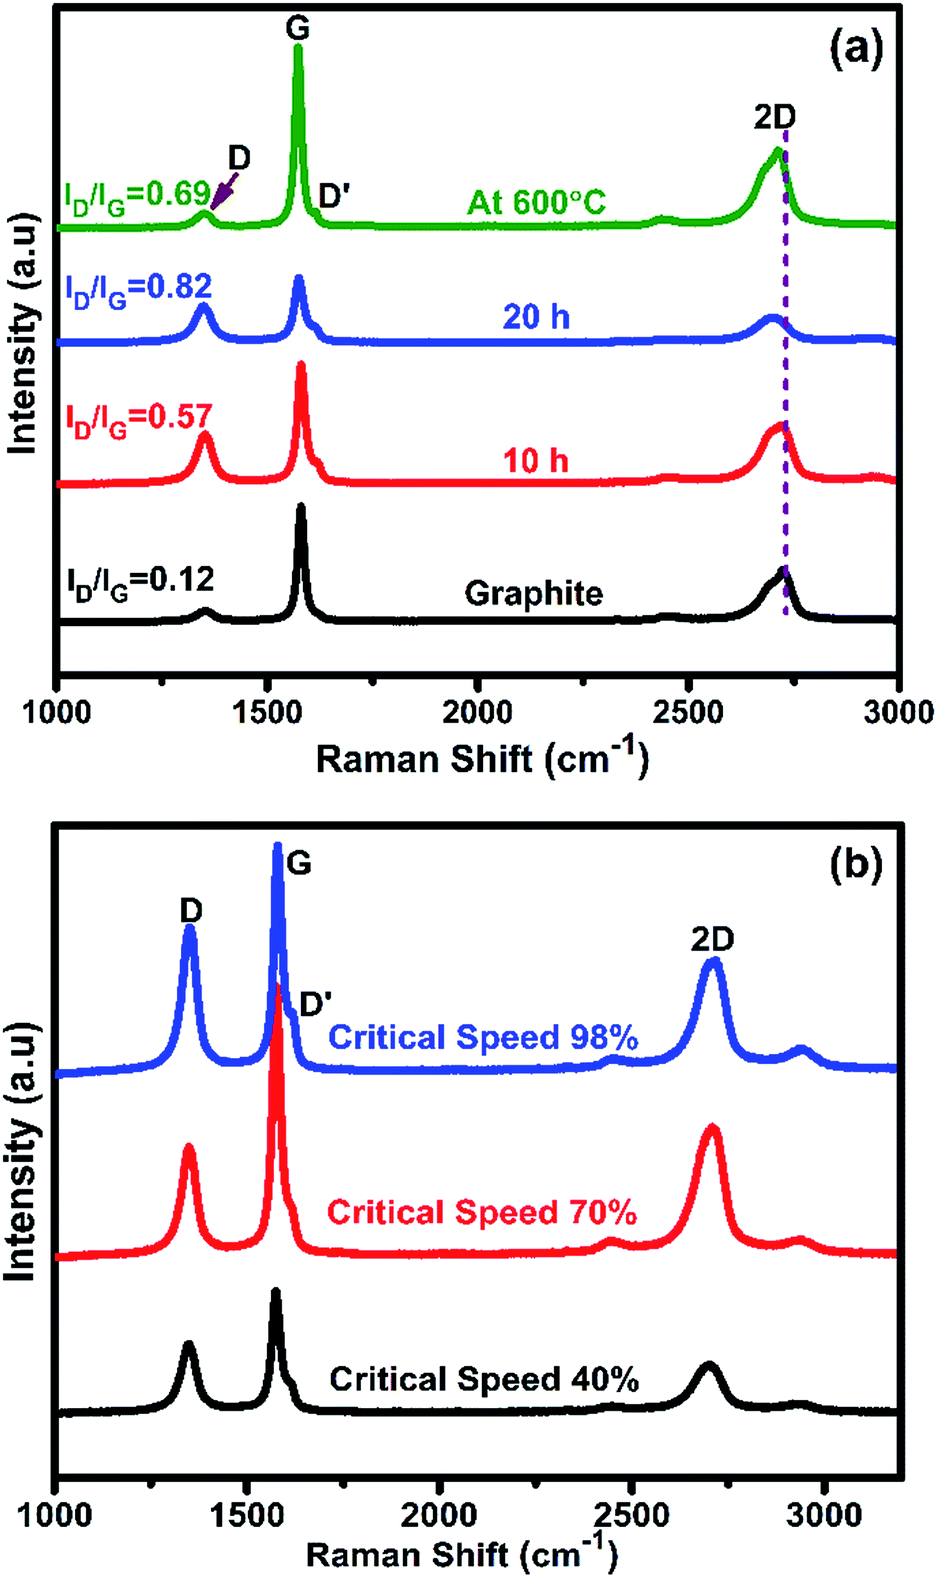 Raman spectra plot of both ball milling and blundered graphene under